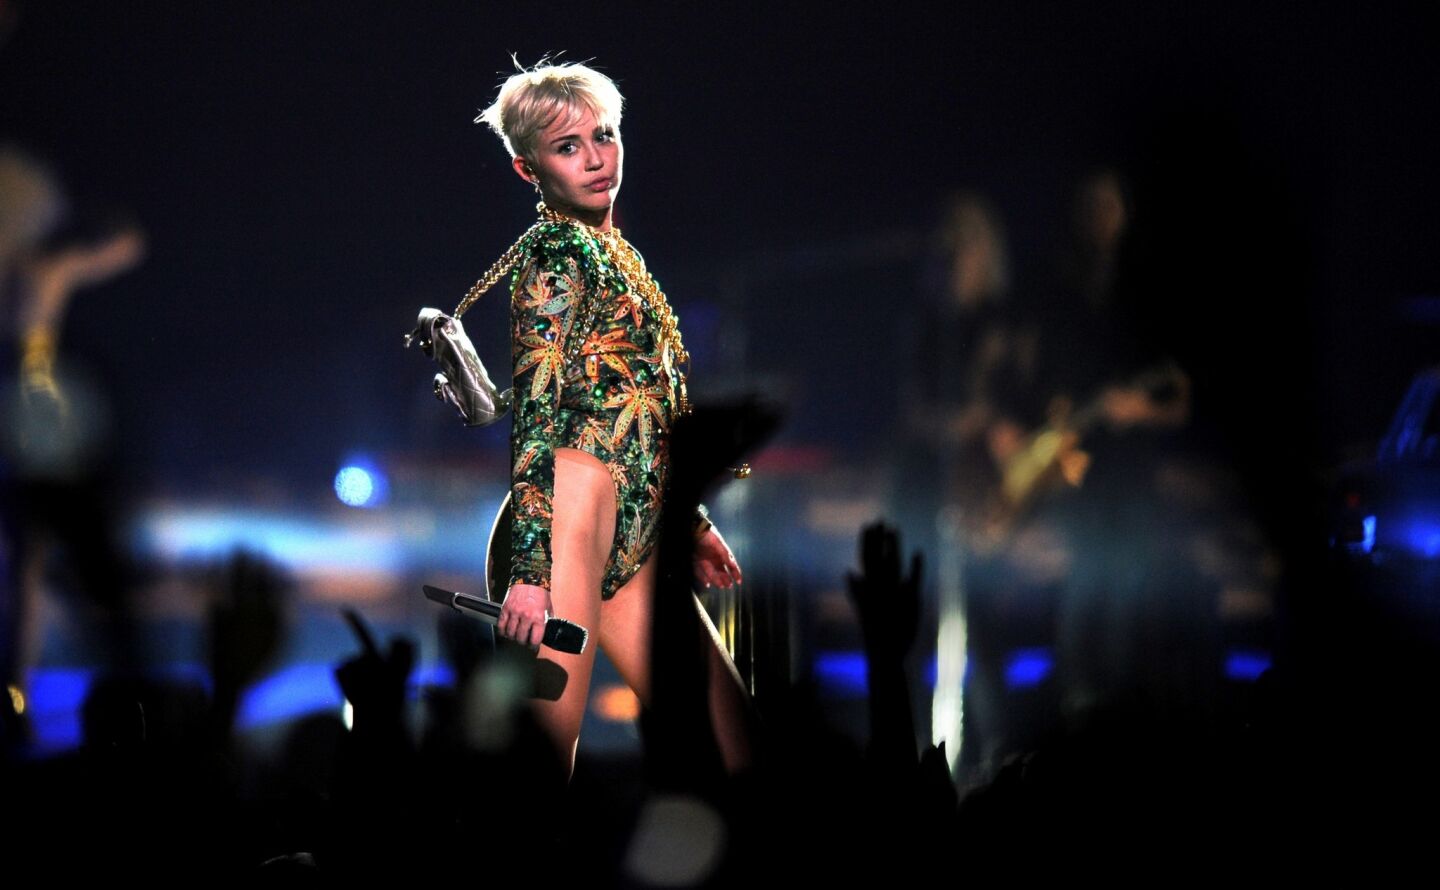 Miley Cyrus looks to the side as the bright lights catch a glimpse of her blond pixie cut.